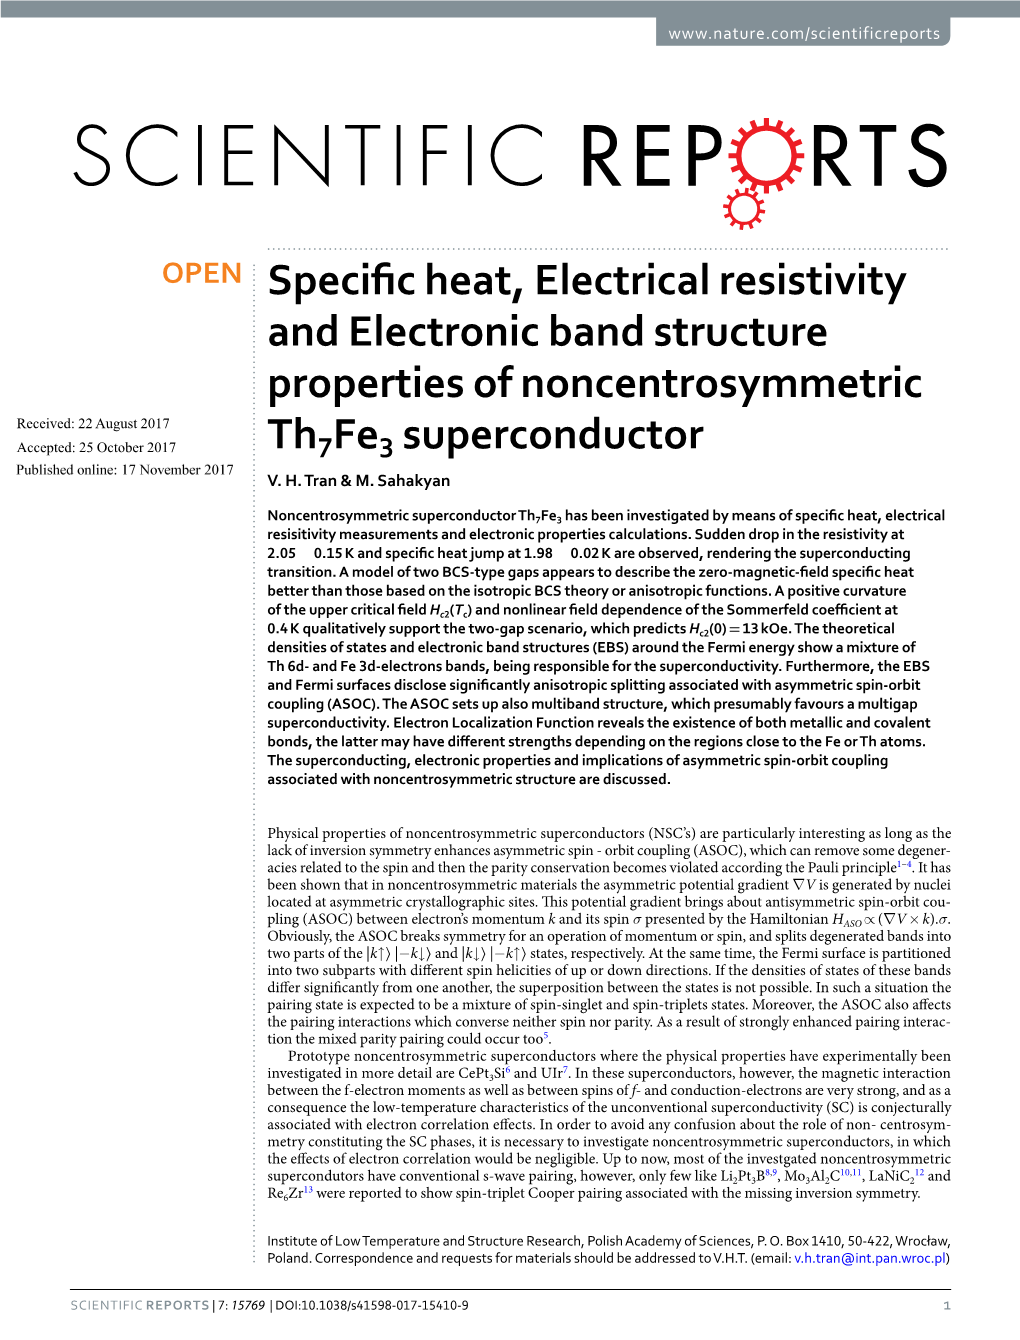 Specific Heat, Electrical Resistivity and Electronic Band Structure Properties